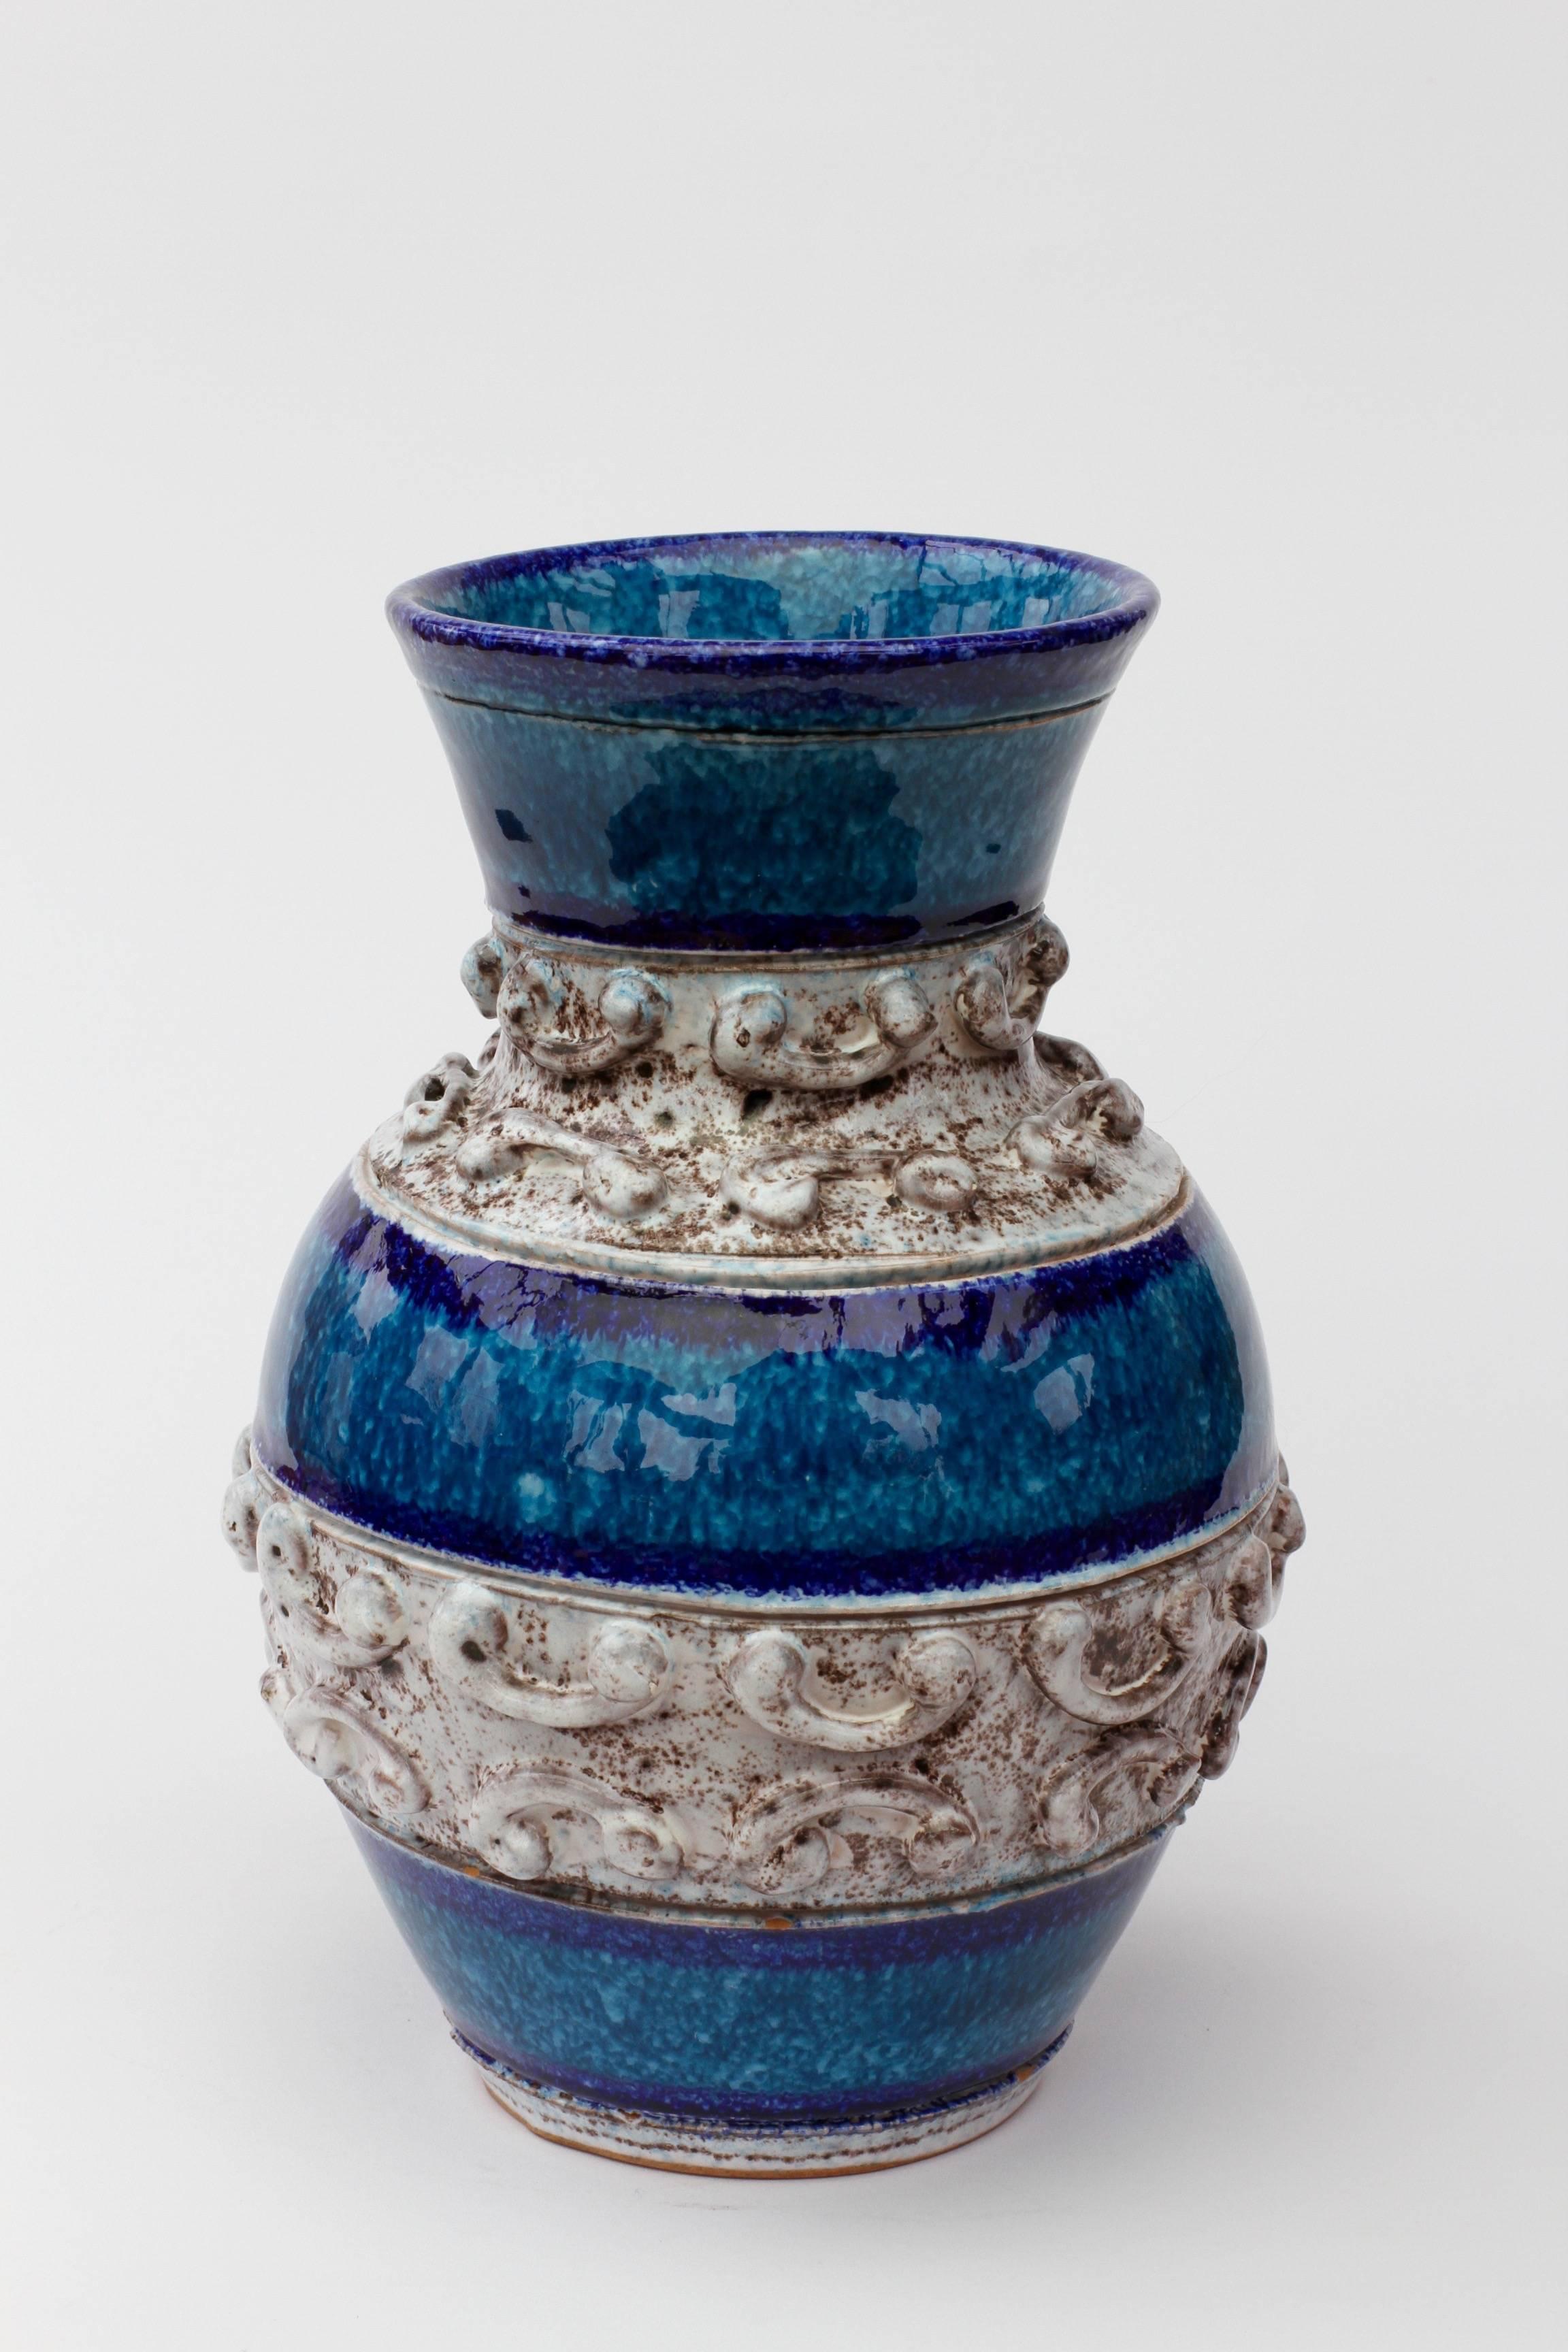 Beautifully detailed vase in vibrant blue with textured off-white accents by Fratelli Fanciullacci, Italy, circa 1960s.
     